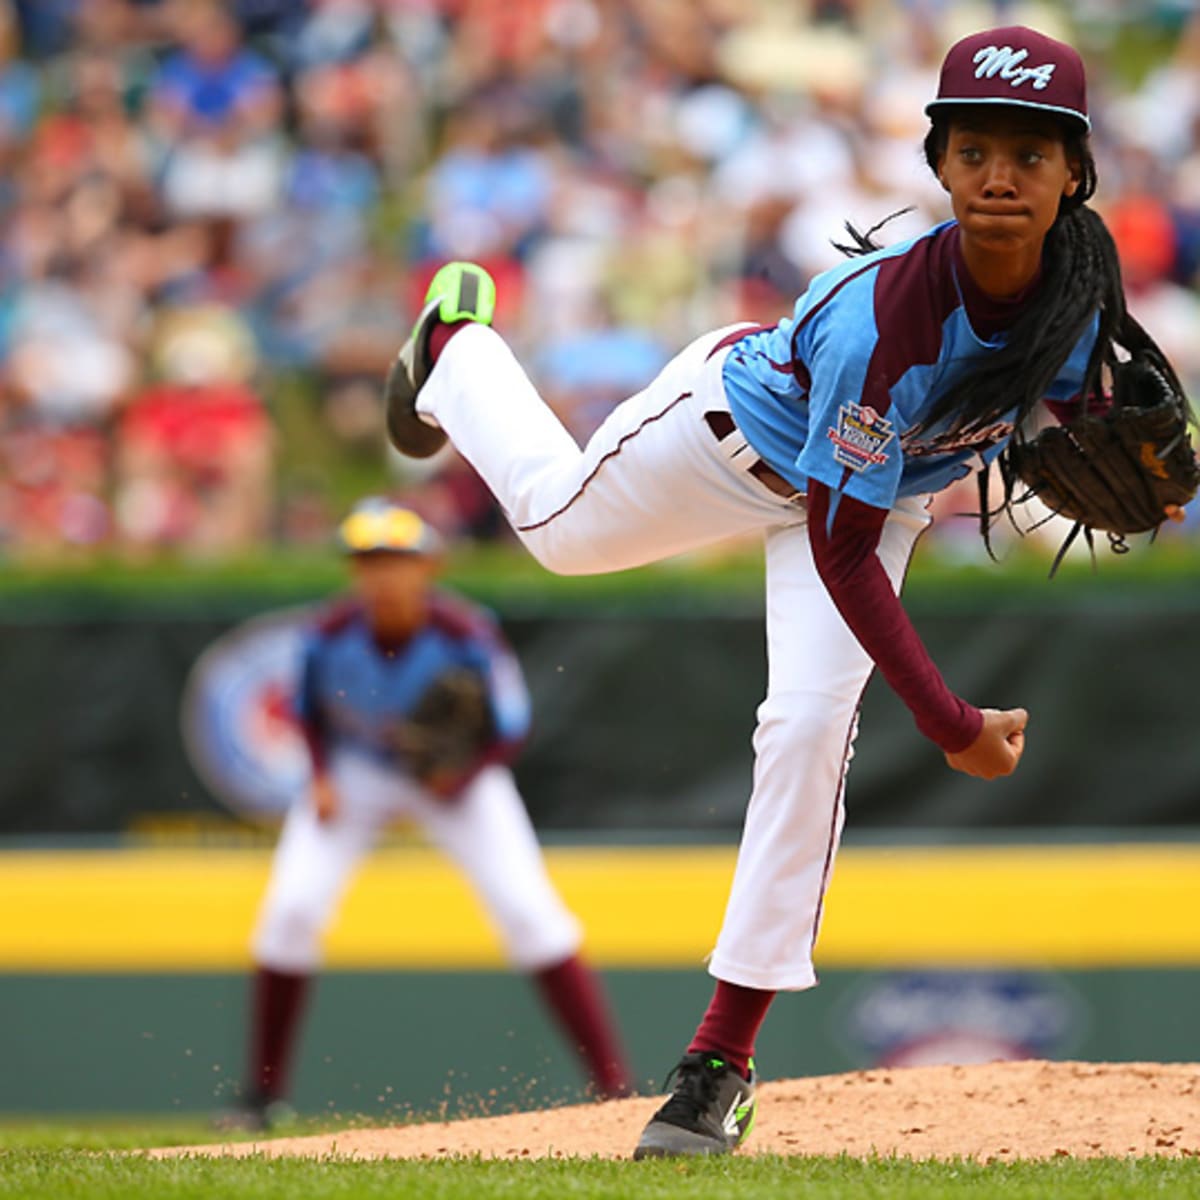 How Mo'ne Davis, Taney captured national fame at Little League World Series  - Sports Illustrated